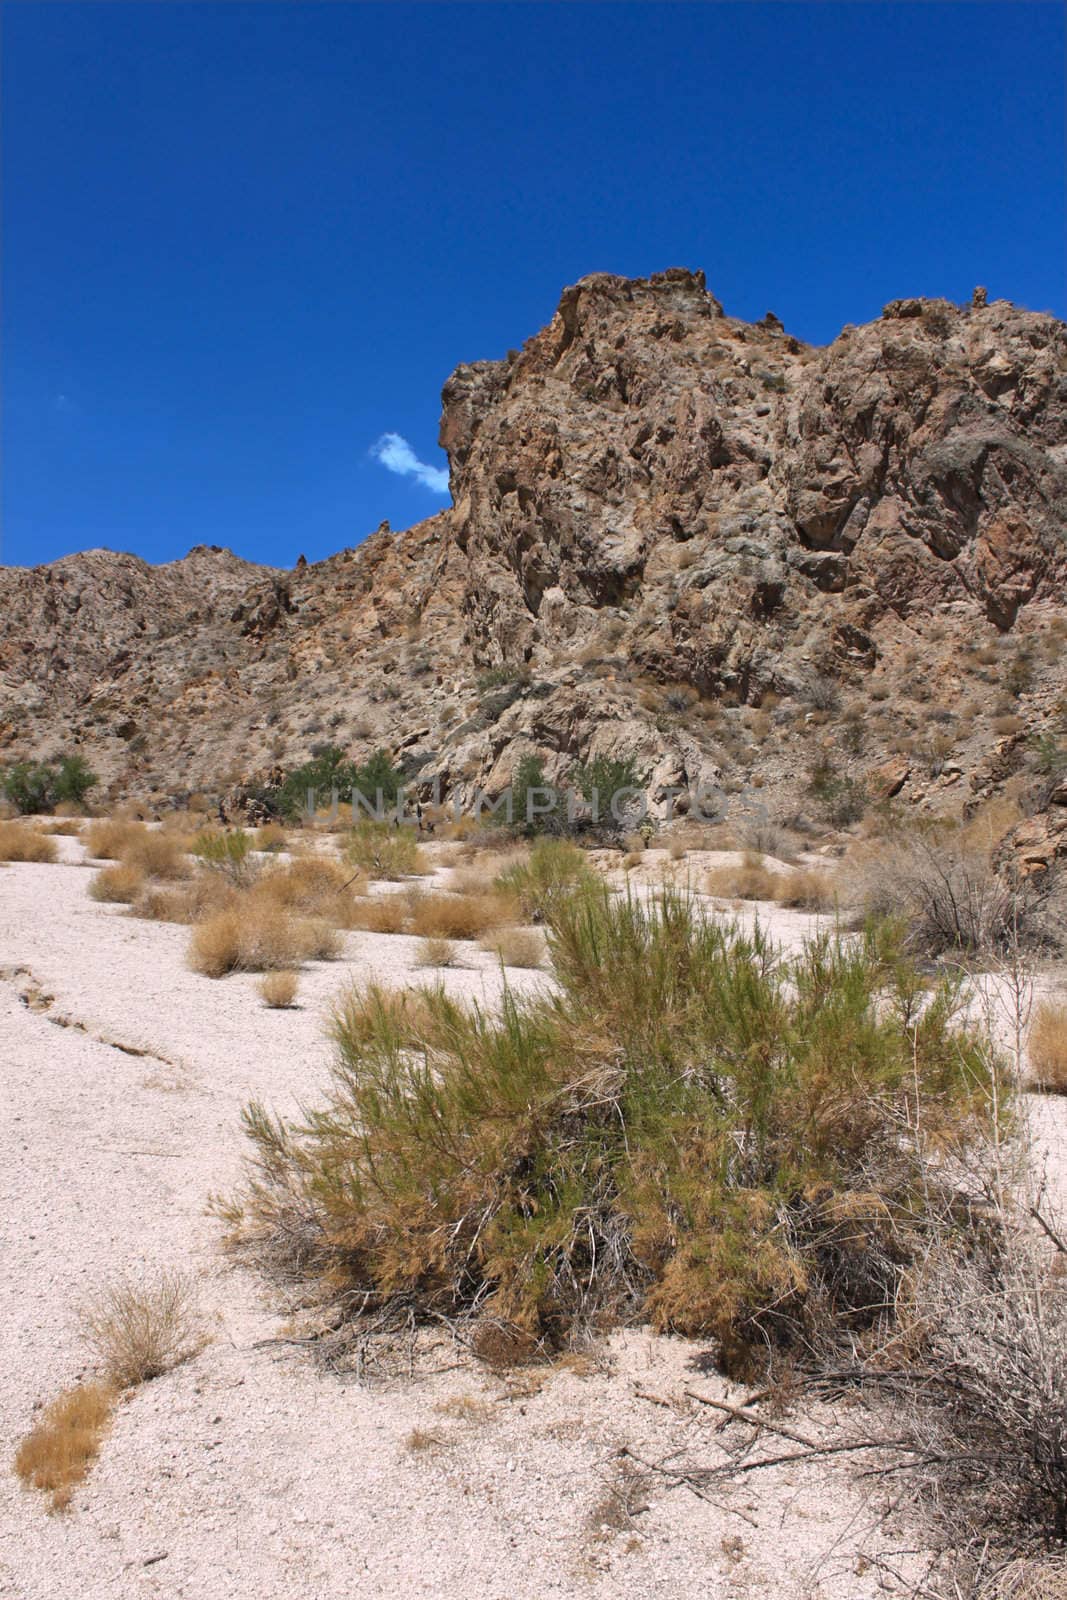 The Arid landscape of Grapevine Canyon in Nevada.